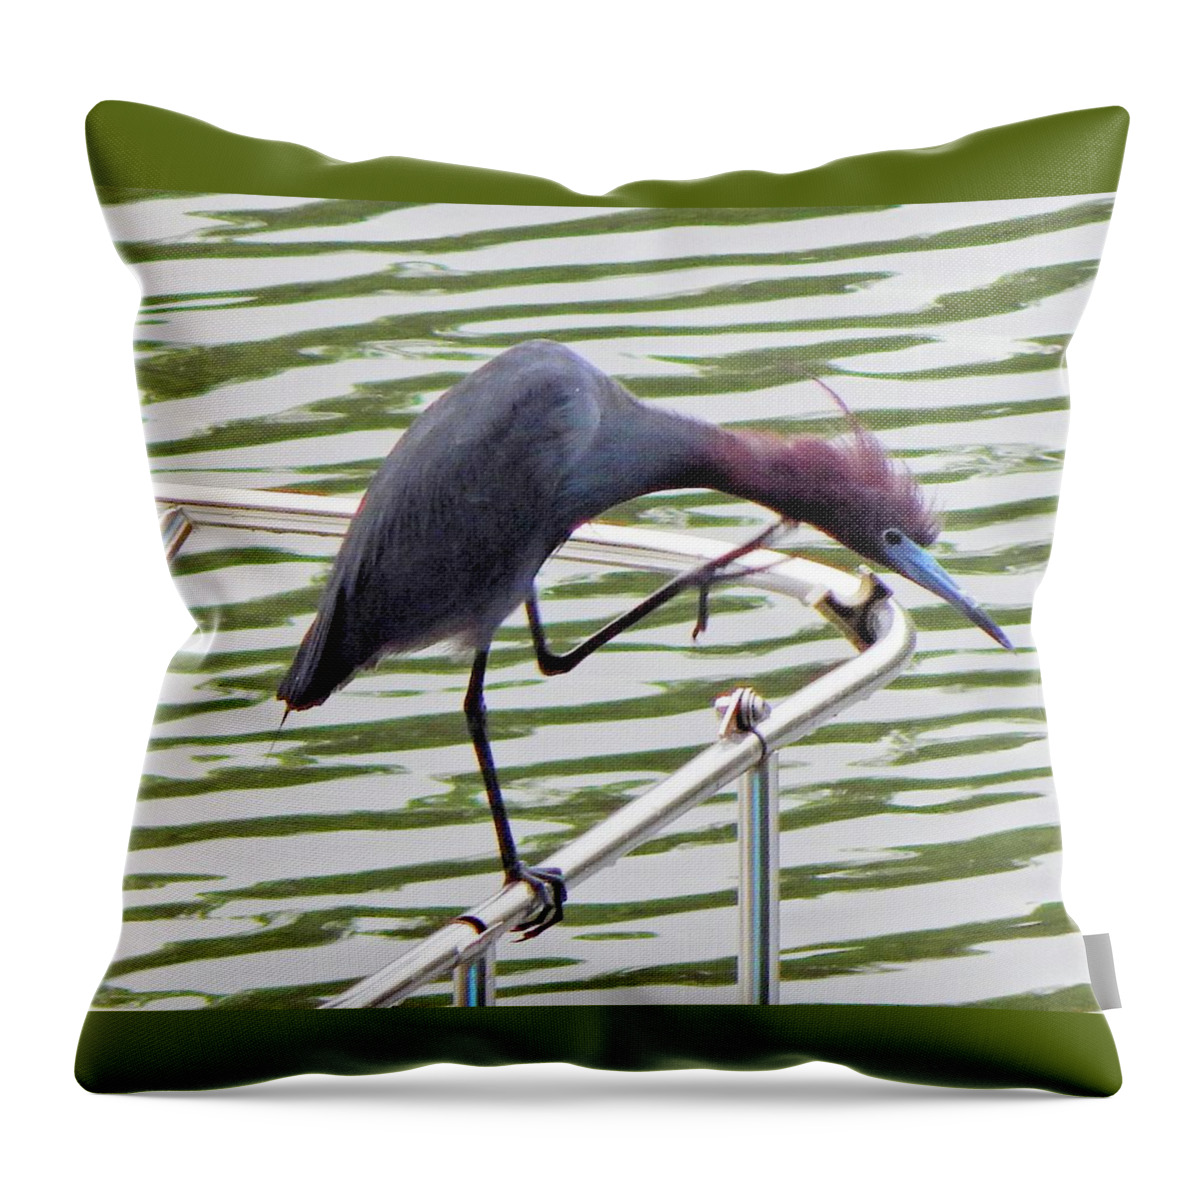 Birds Throw Pillow featuring the photograph Where's My Fish? by Karen Stansberry